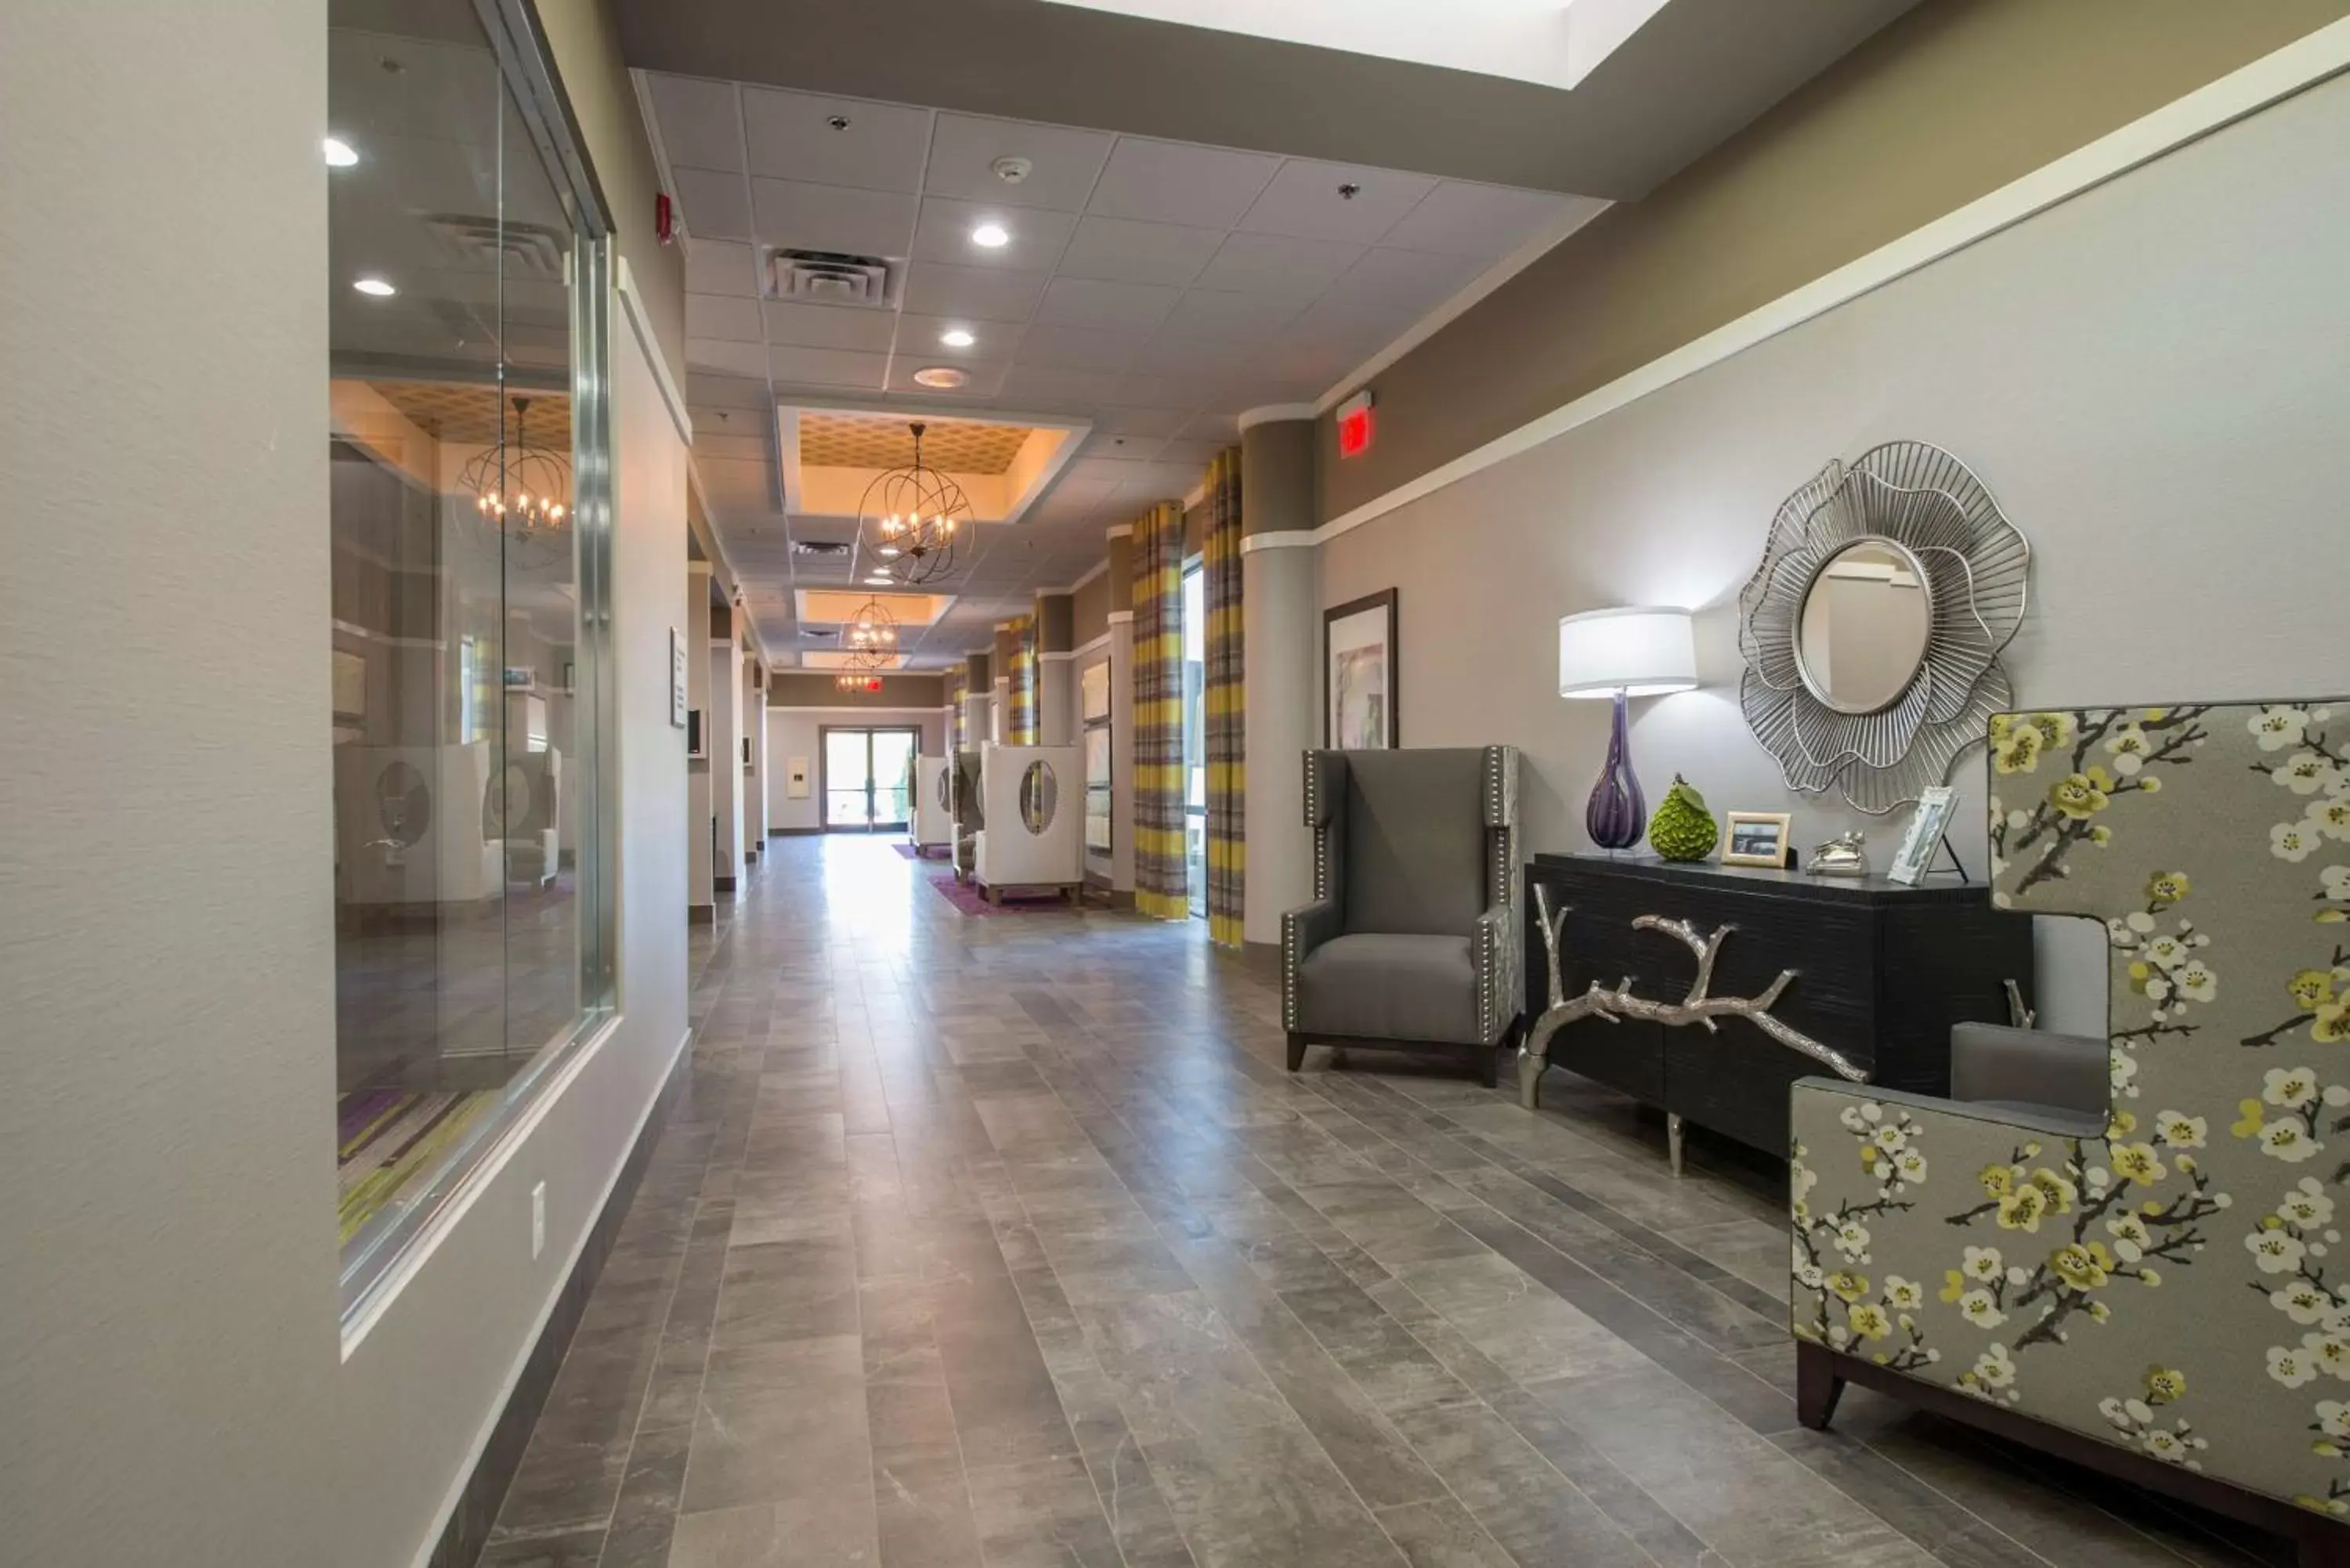 Meeting/conference room, Lobby/Reception in DoubleTree by Hilton Winston Salem - University, NC